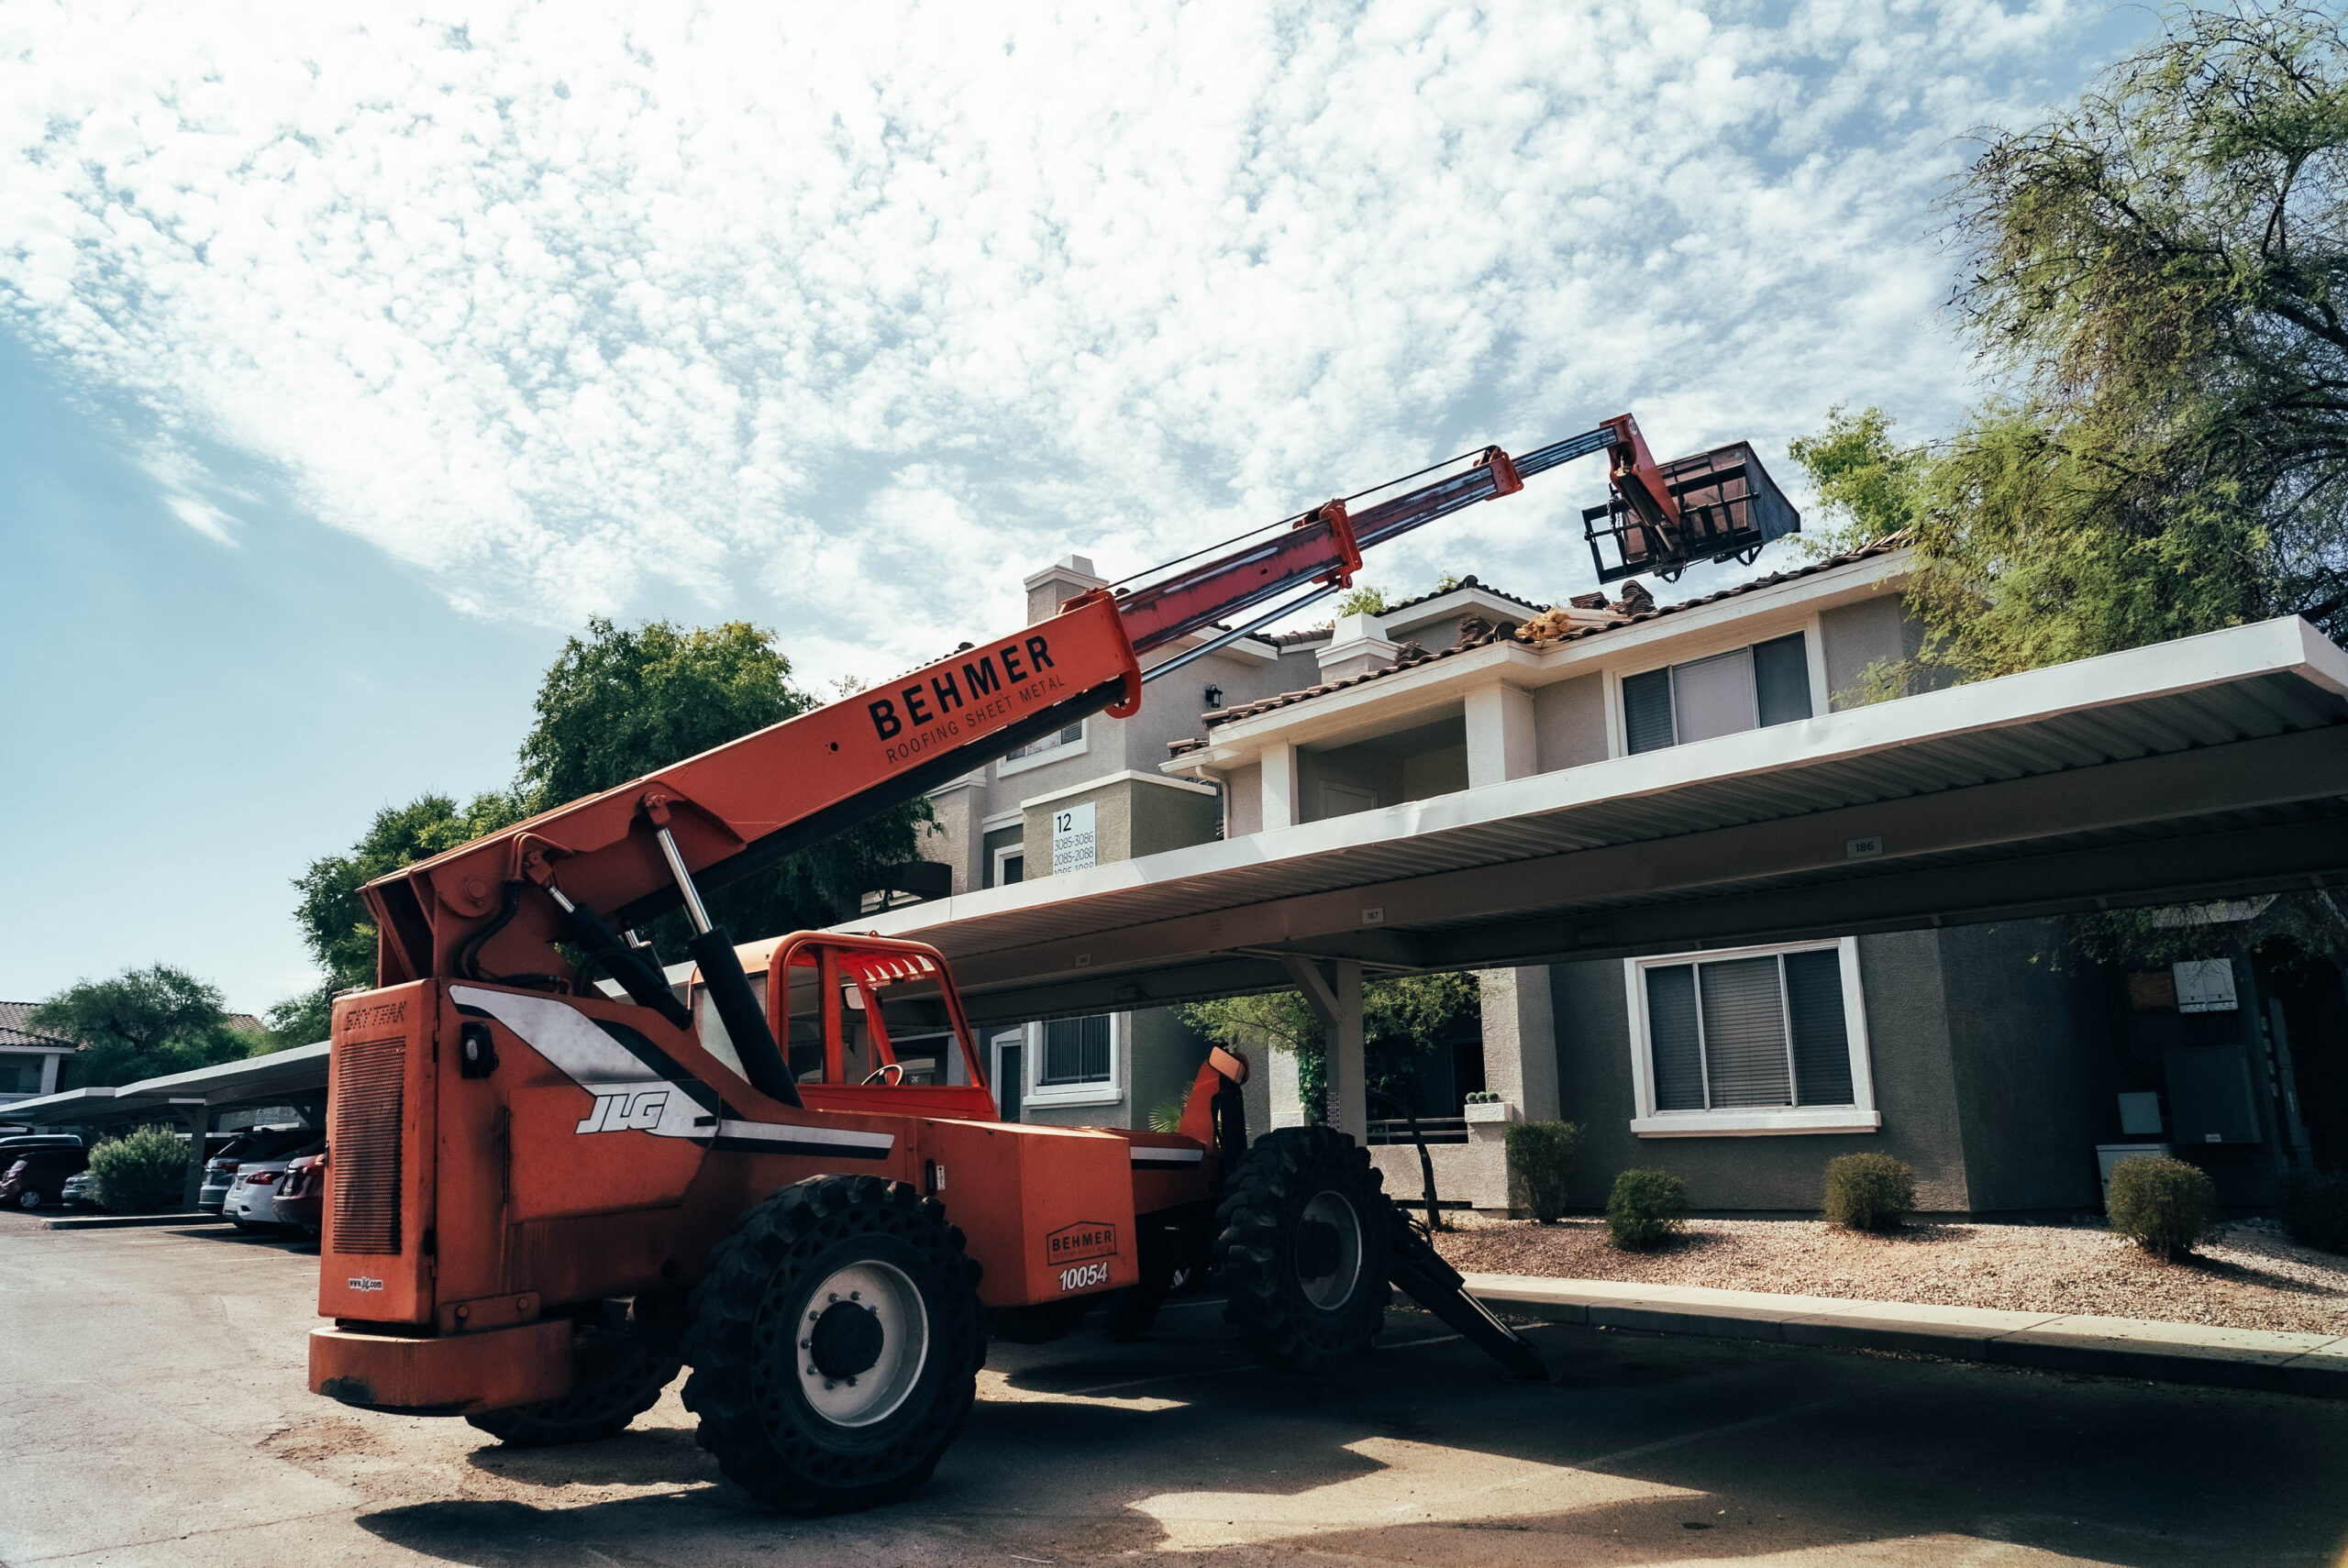 Dominant orange crane signaling a major tile roof installation project in Ironwood Village.